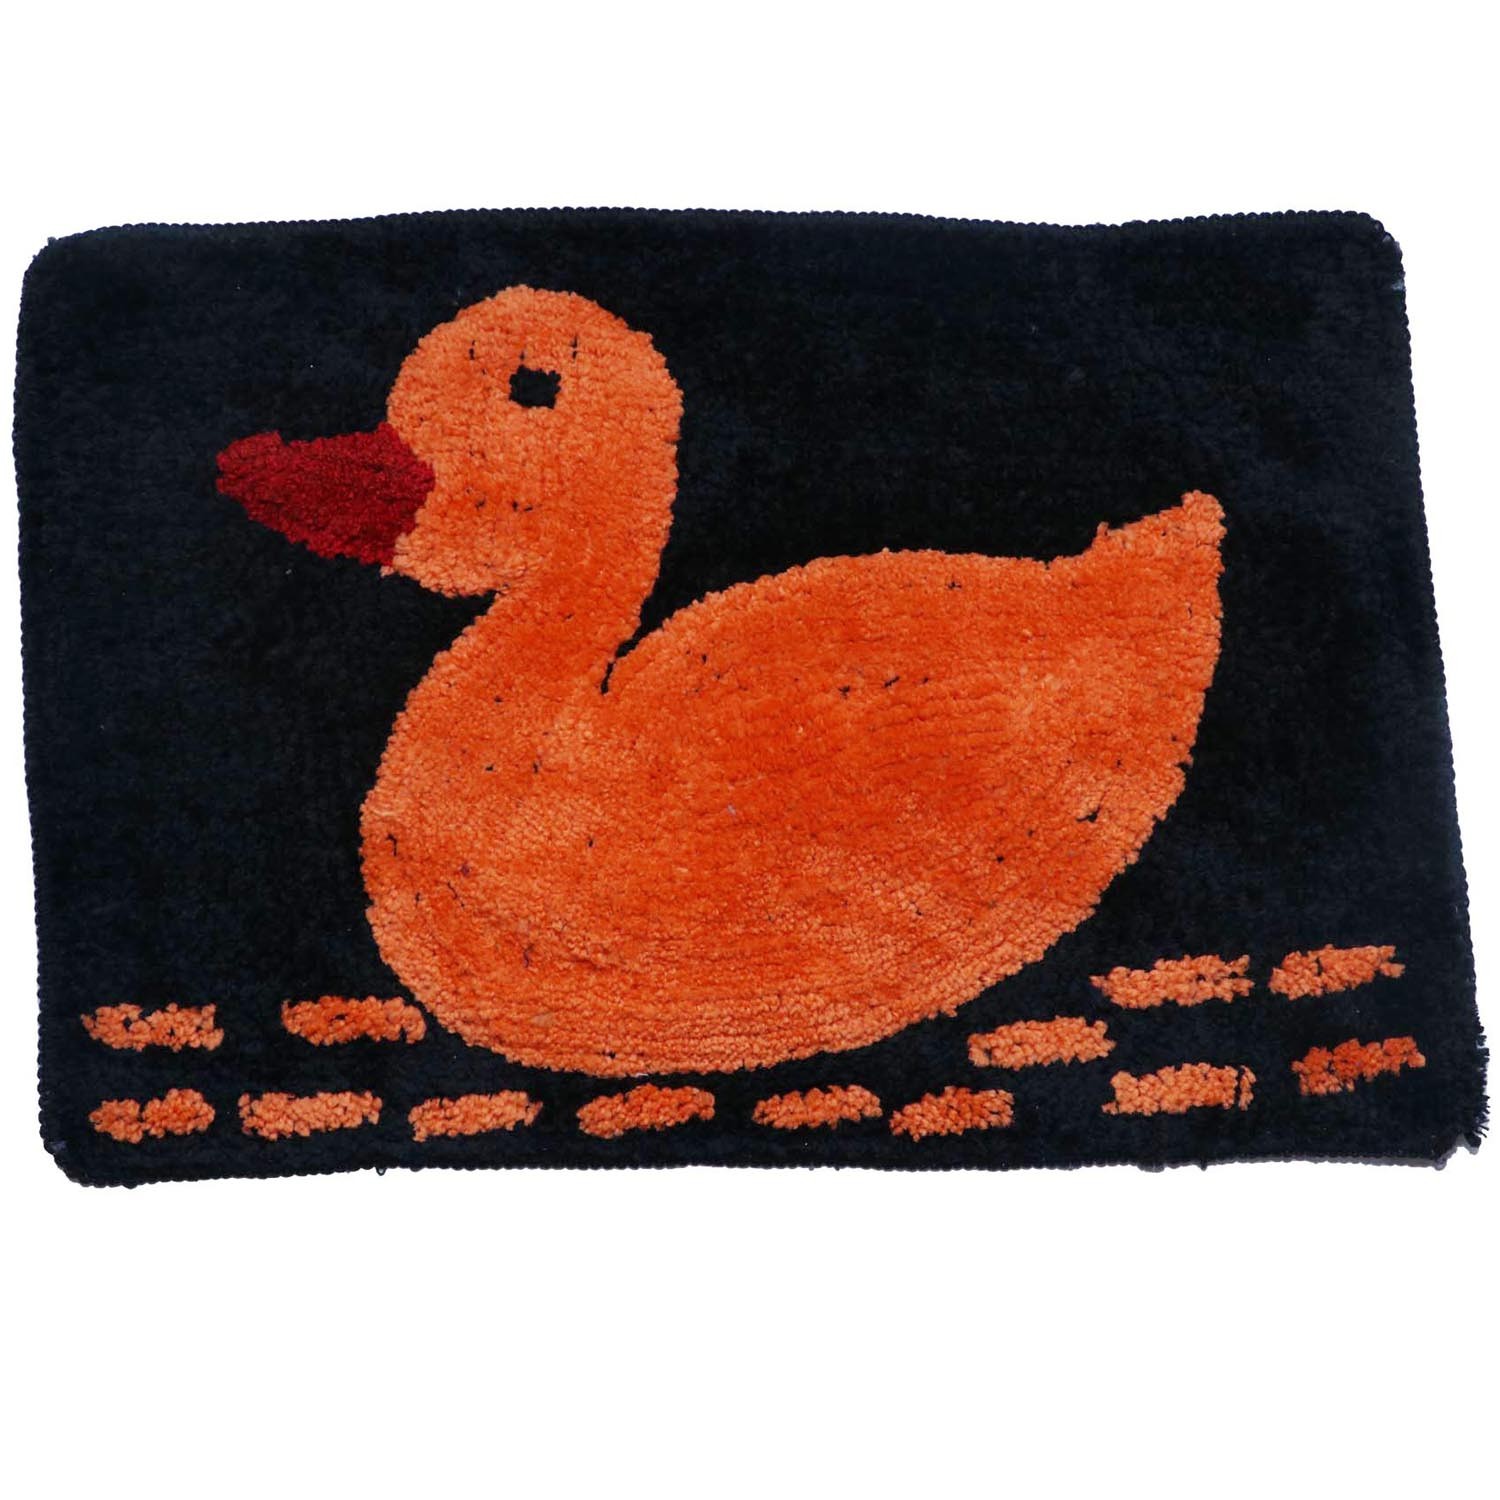 Door Mat Anti-Slip Living Room Bath Room Quick Drying Absorbent Mat for Home and Kitchen | Size (60cm x 40cm) | Duck Design | Black Color